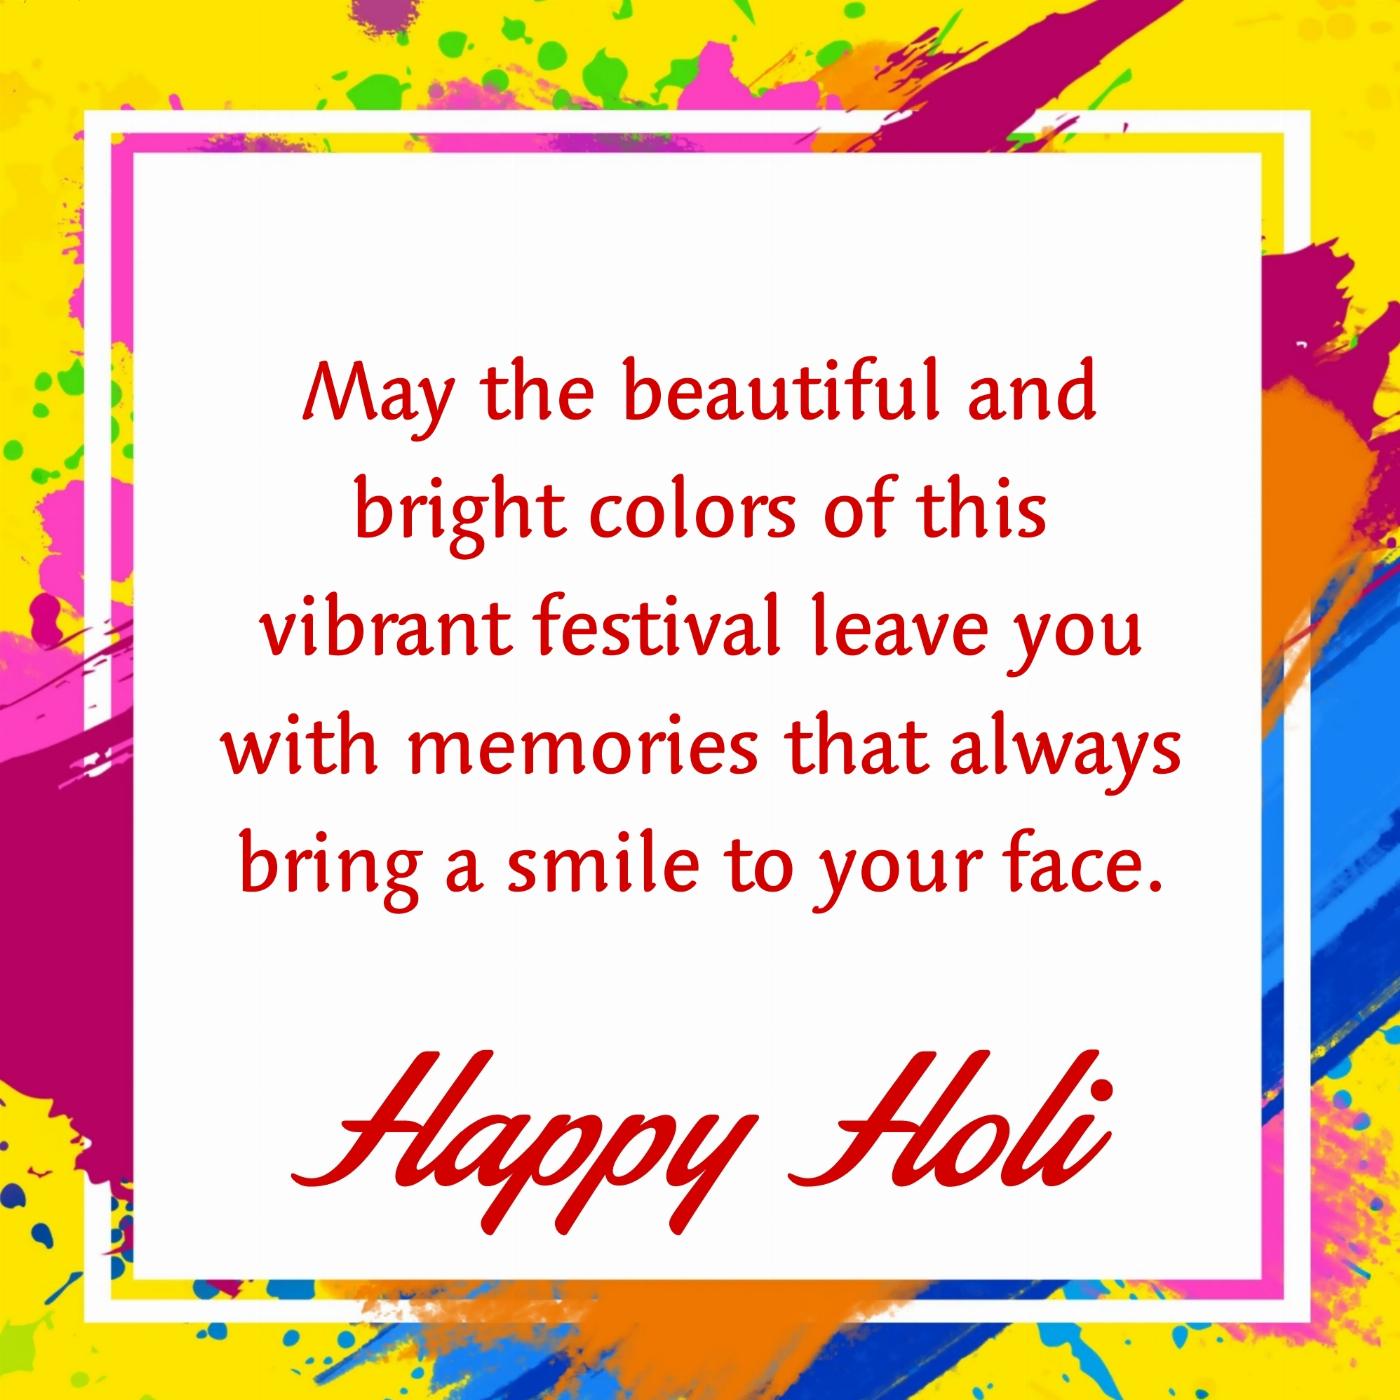 May the beautiful and bright colors of this vibrant festival leave you with memories